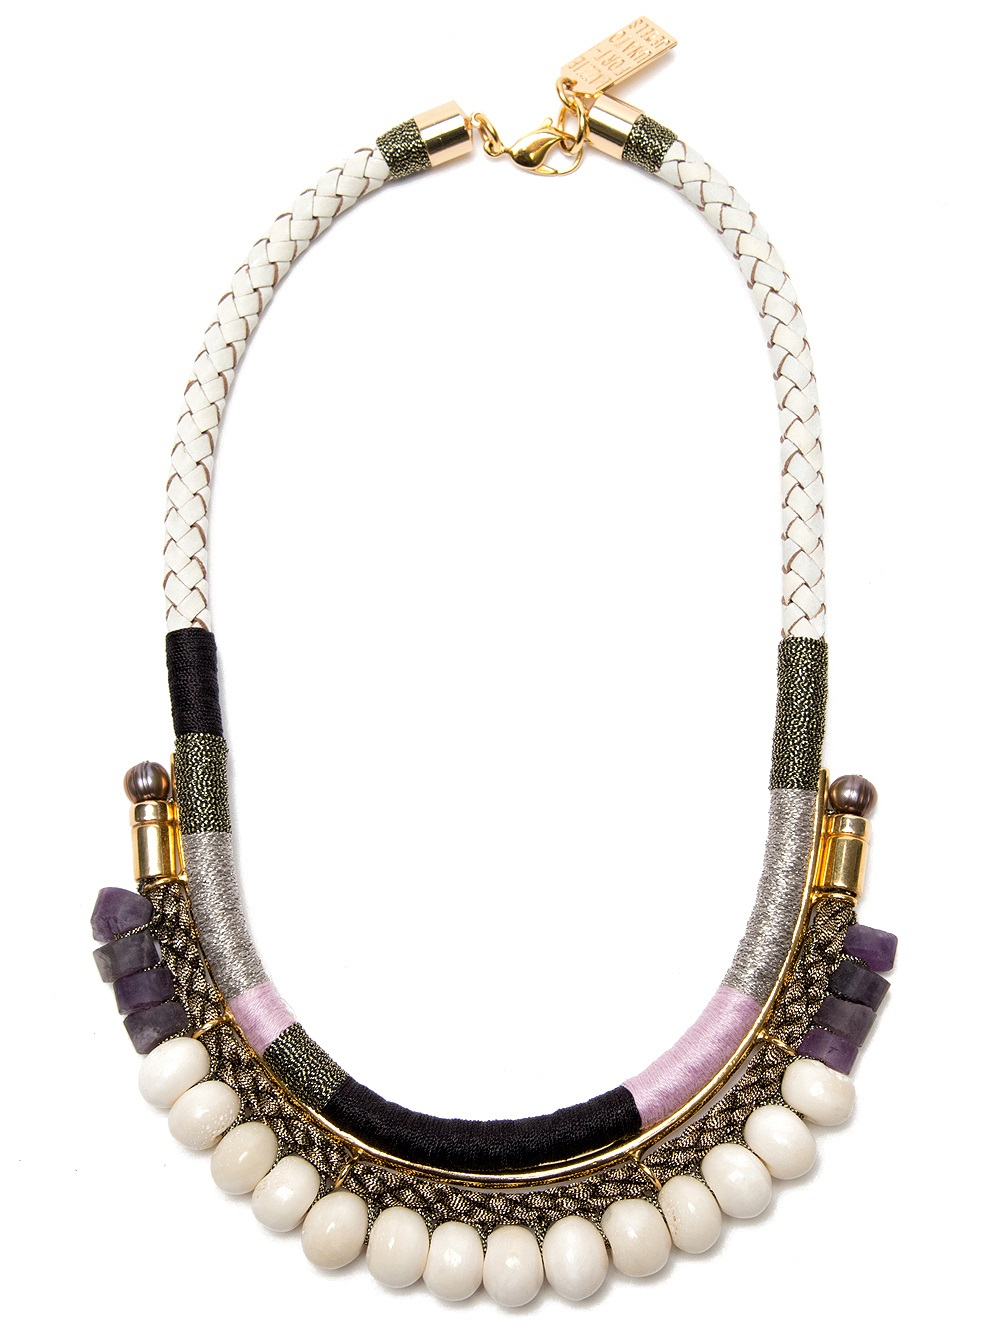 Lyst - Lizzie Fortunato Rope and Bead Necklace in White